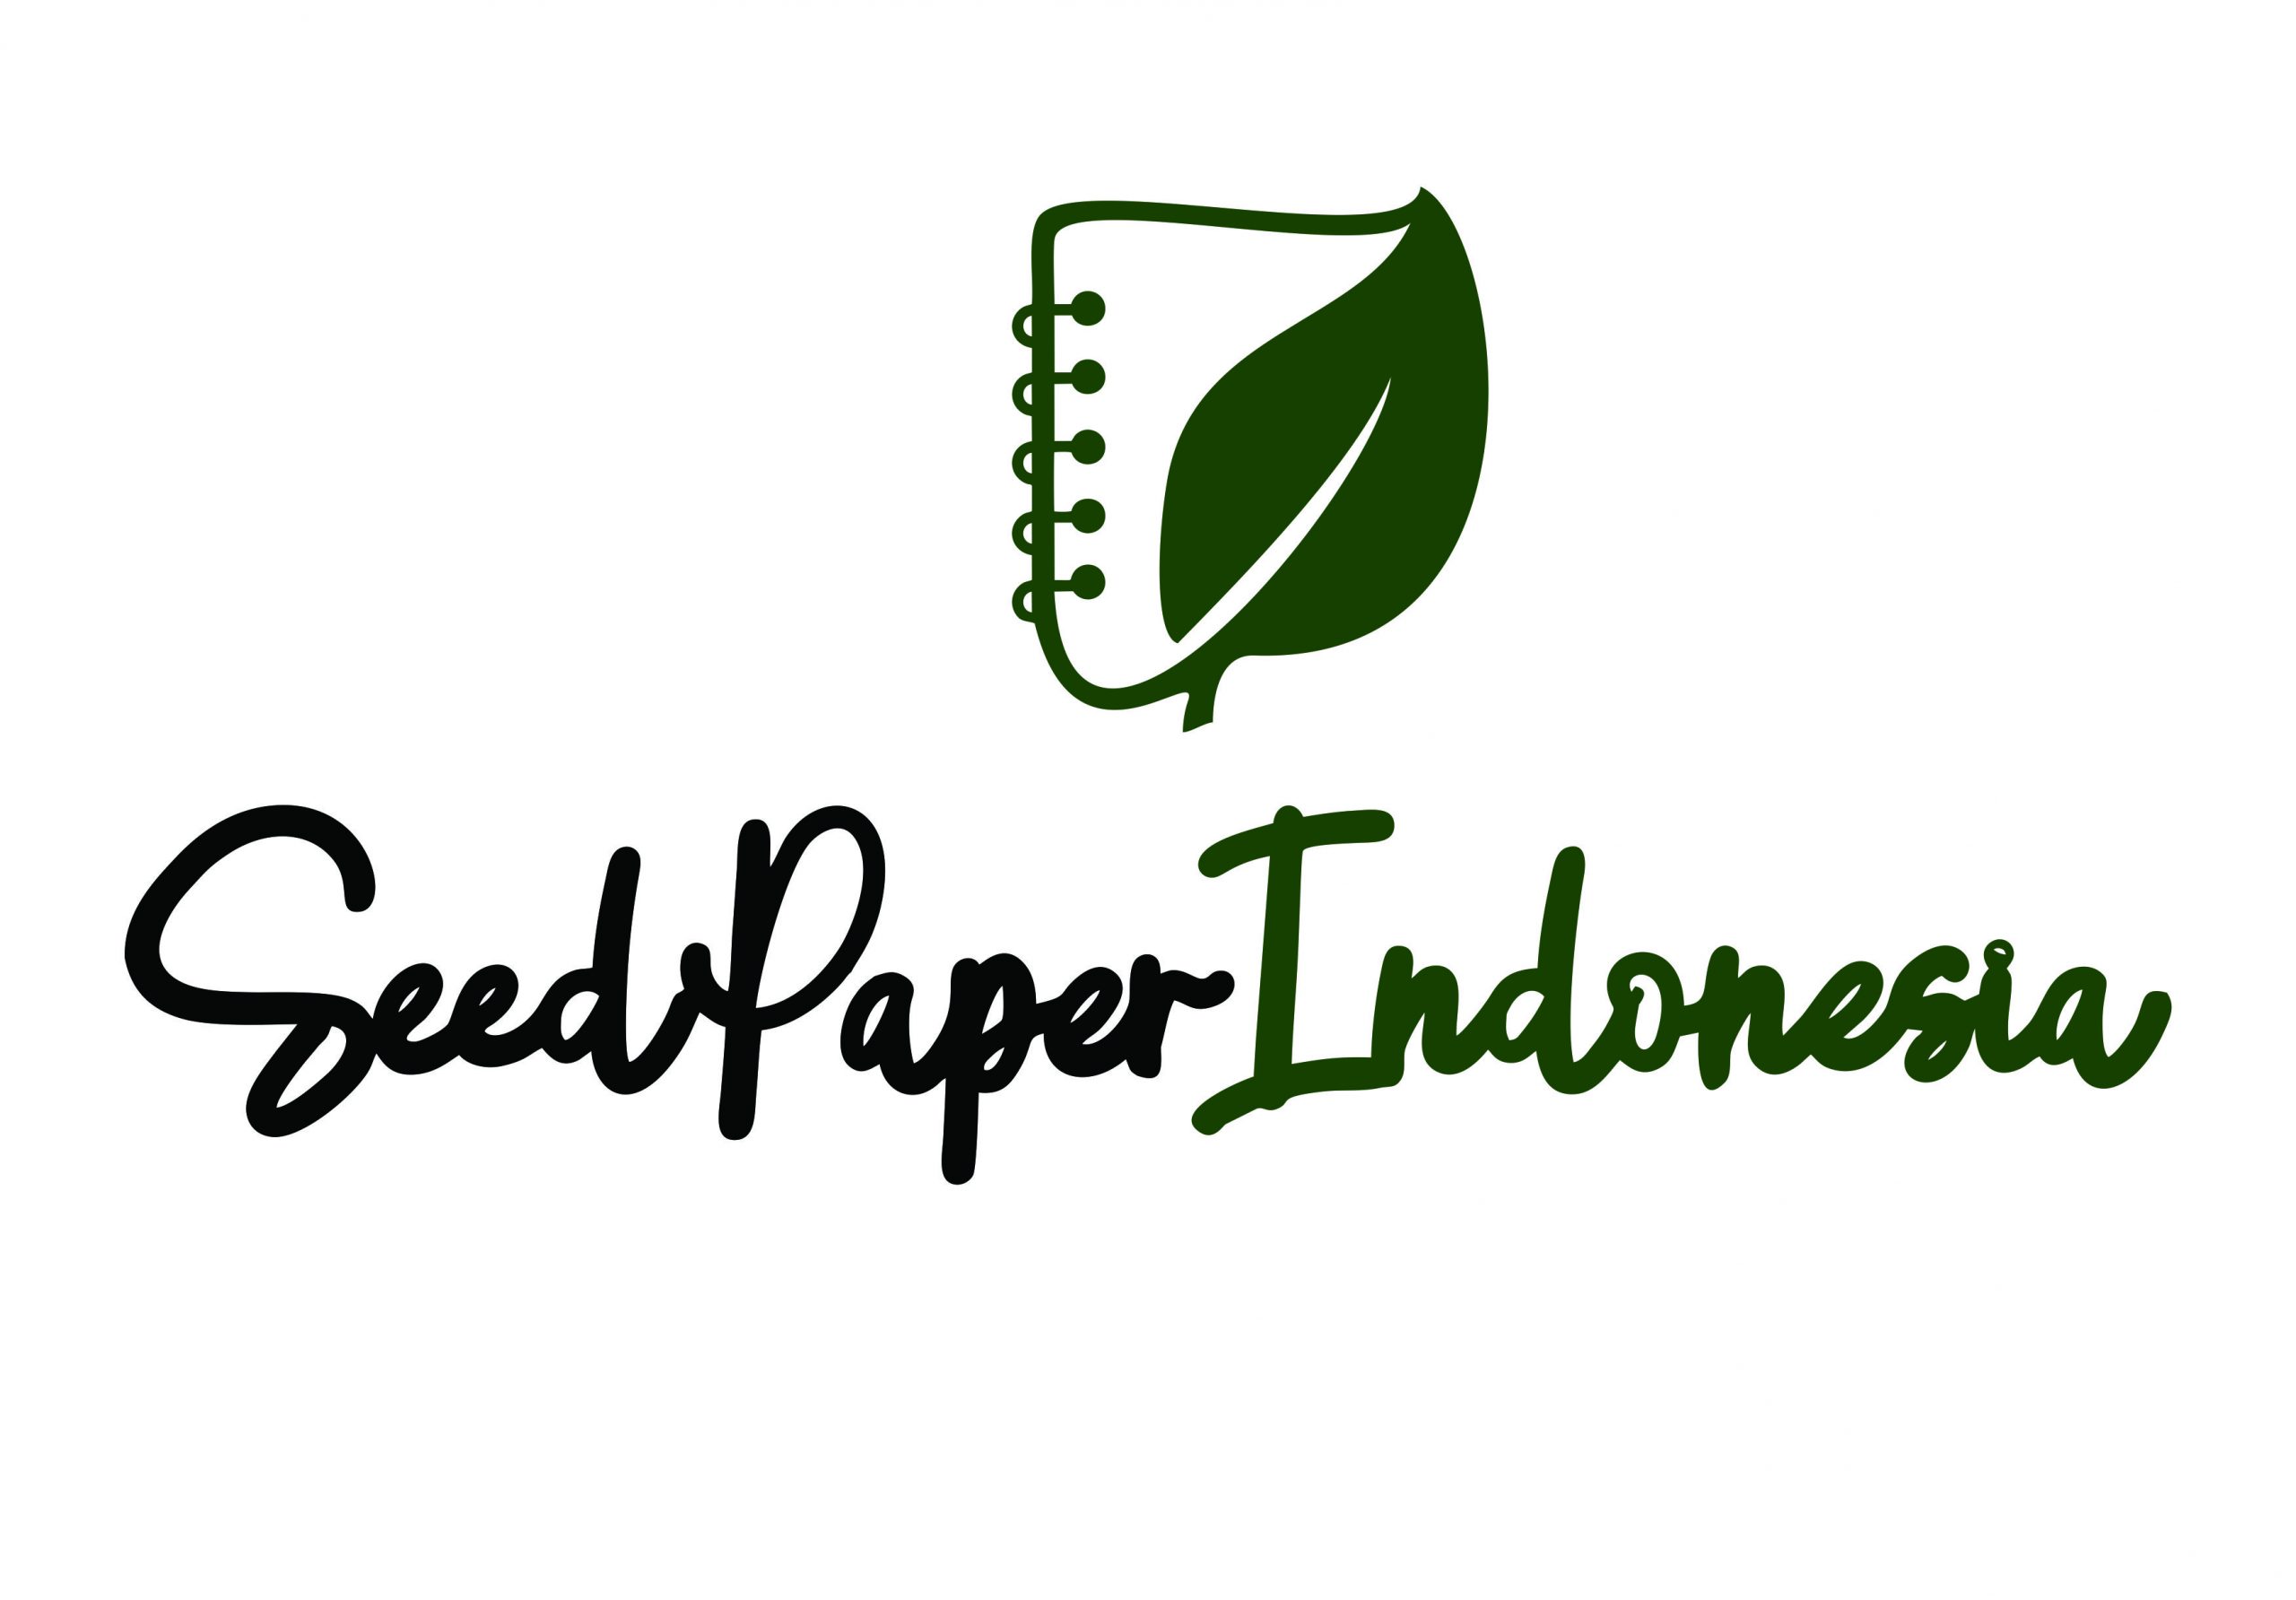 28. Seed Paper